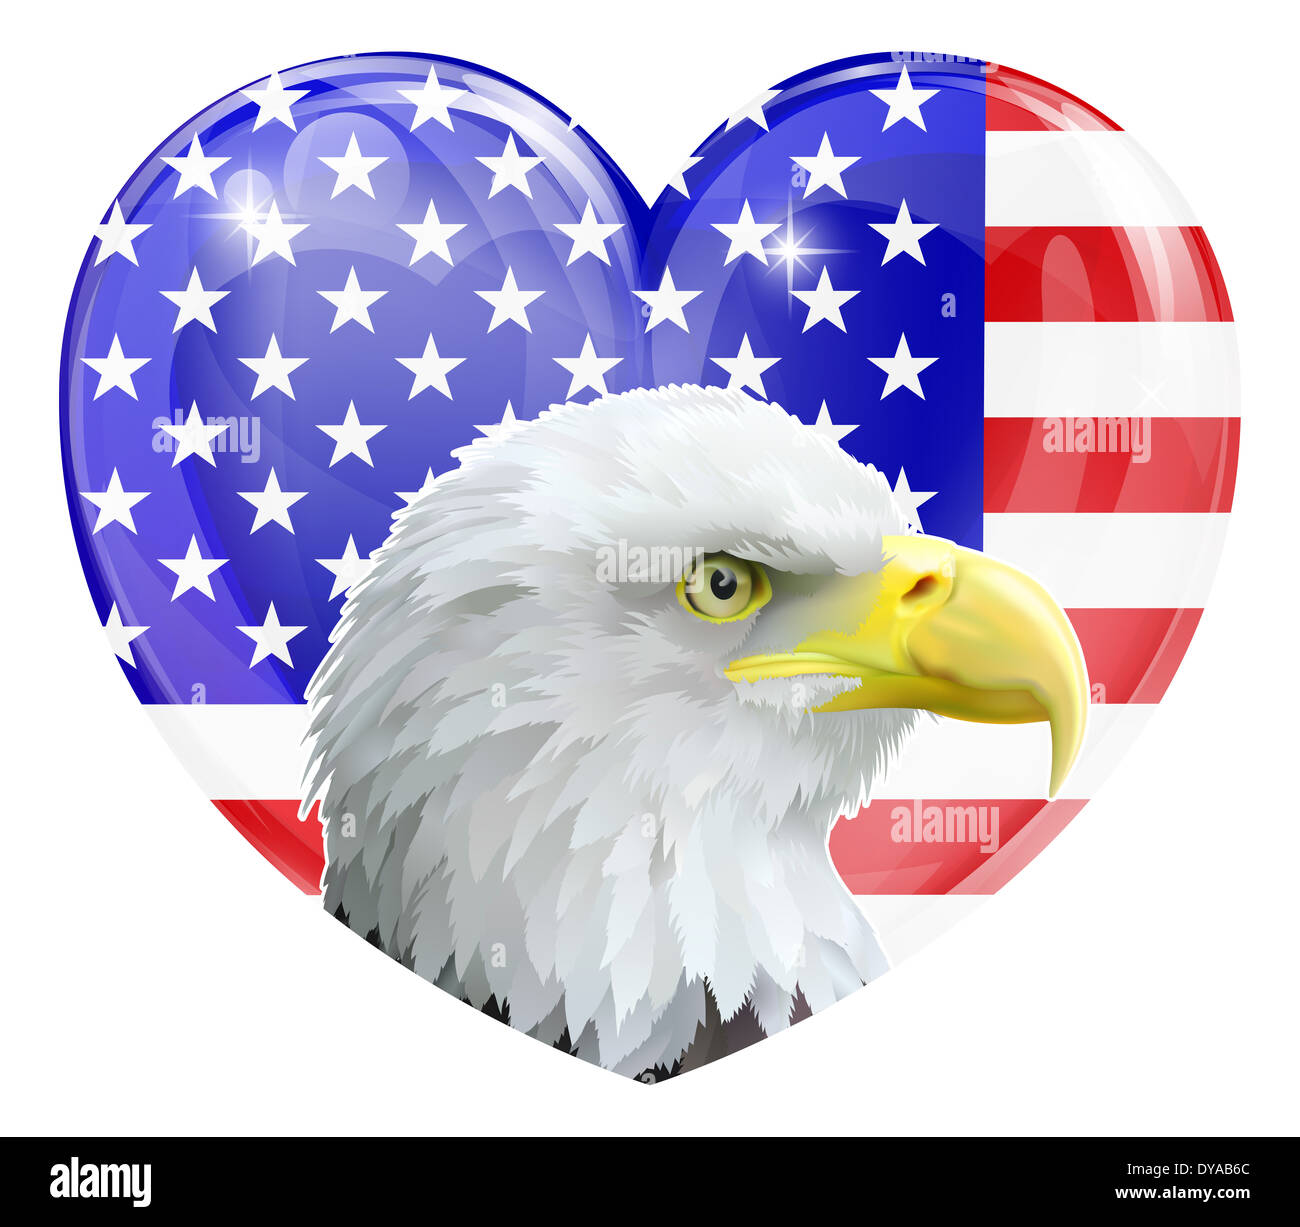 Eagle America love heart concept with and American bald eagle in front of an American flag in the shape of a heart Stock Photo